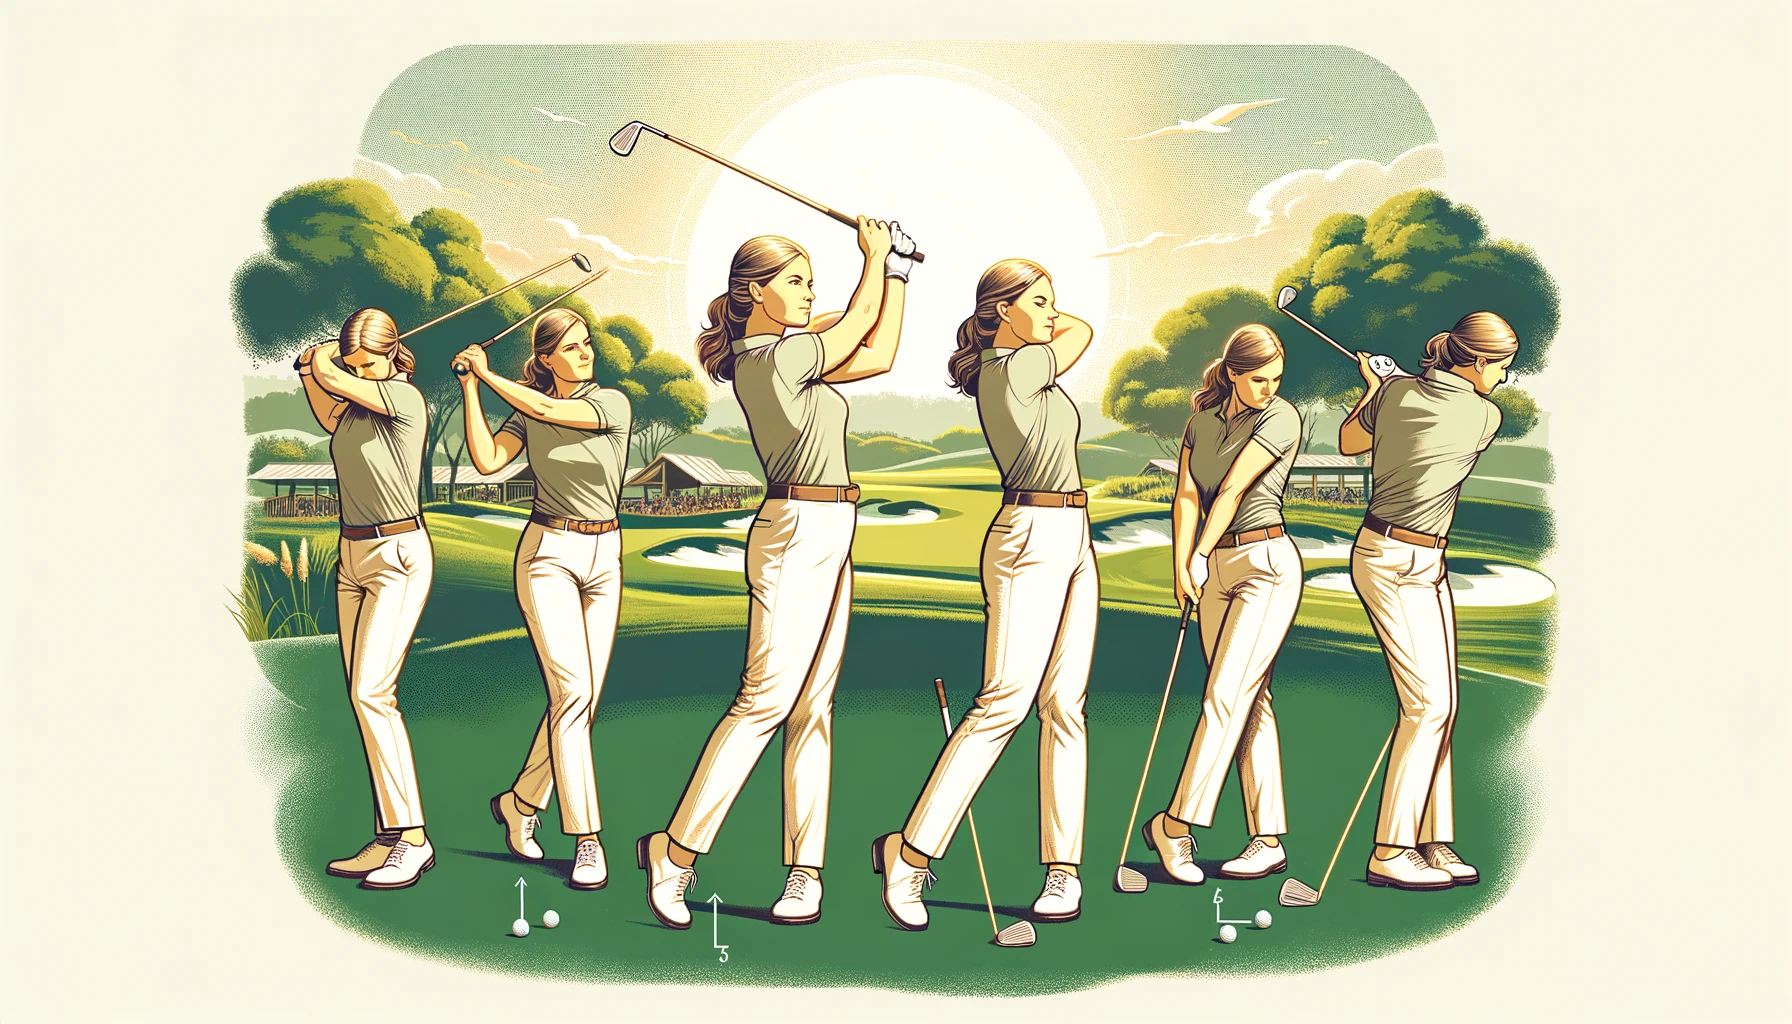 How to swing a golf club: 5 steps for beginners